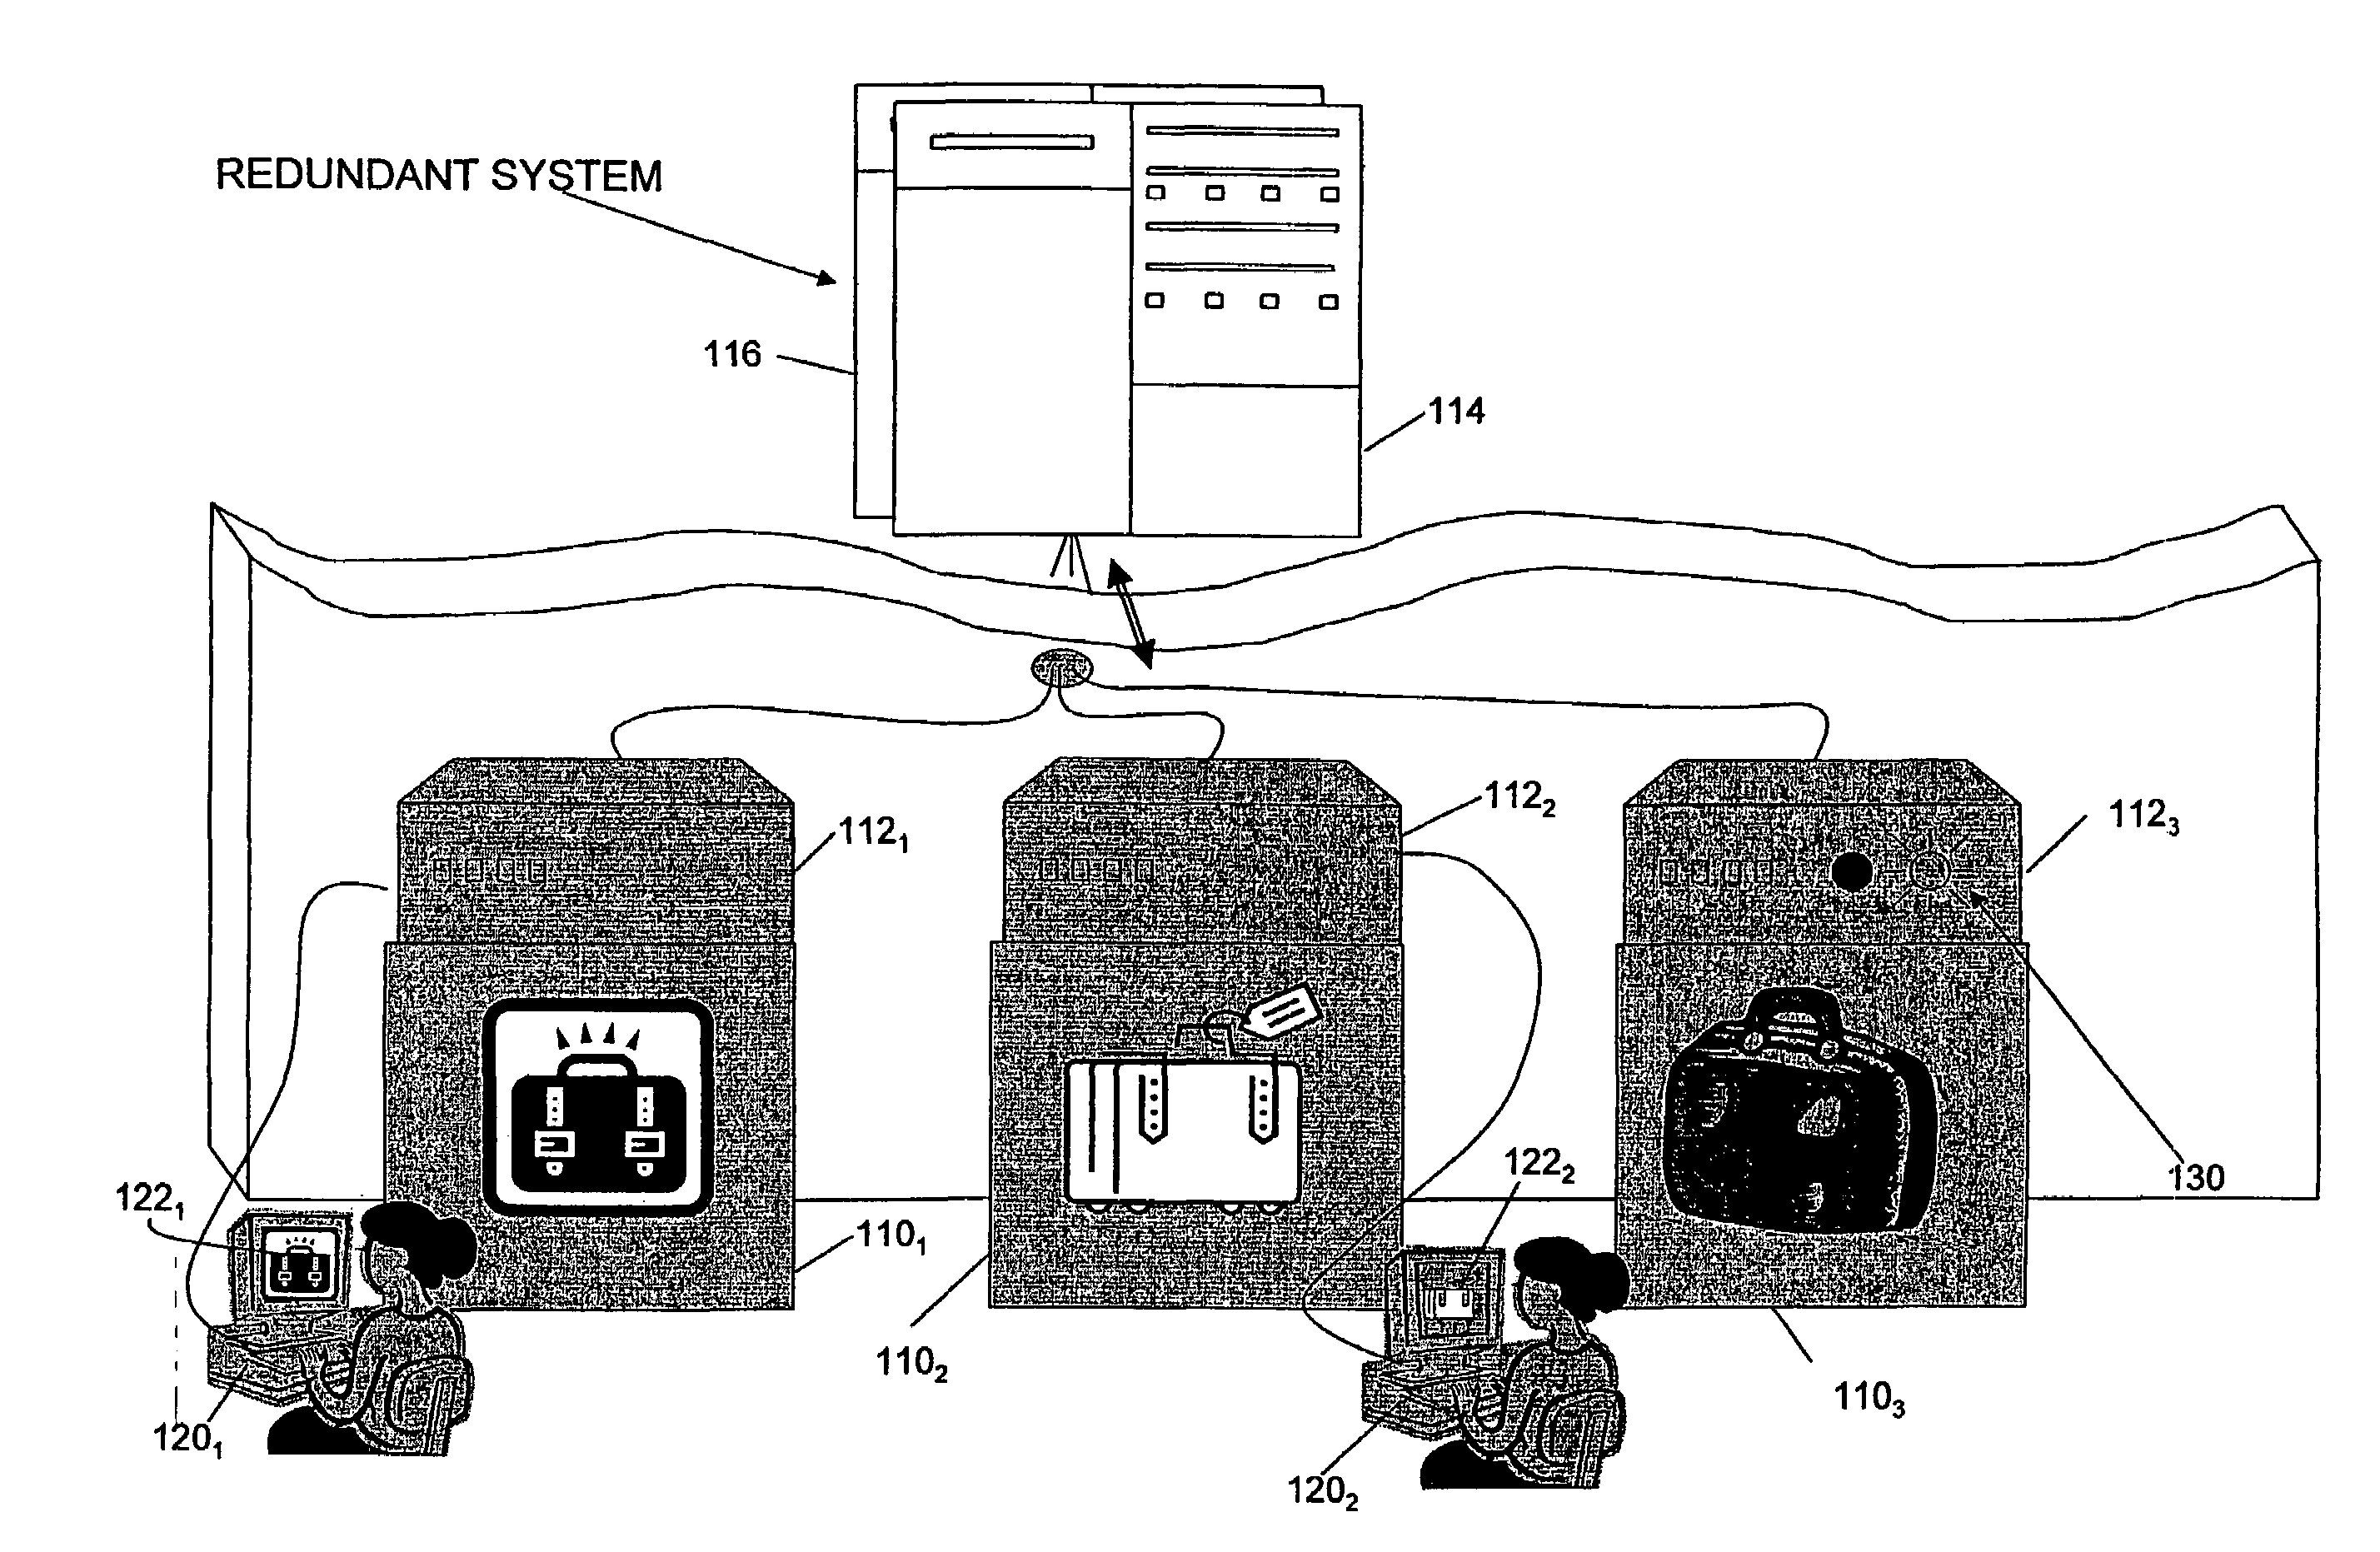 Security system with distributed computing